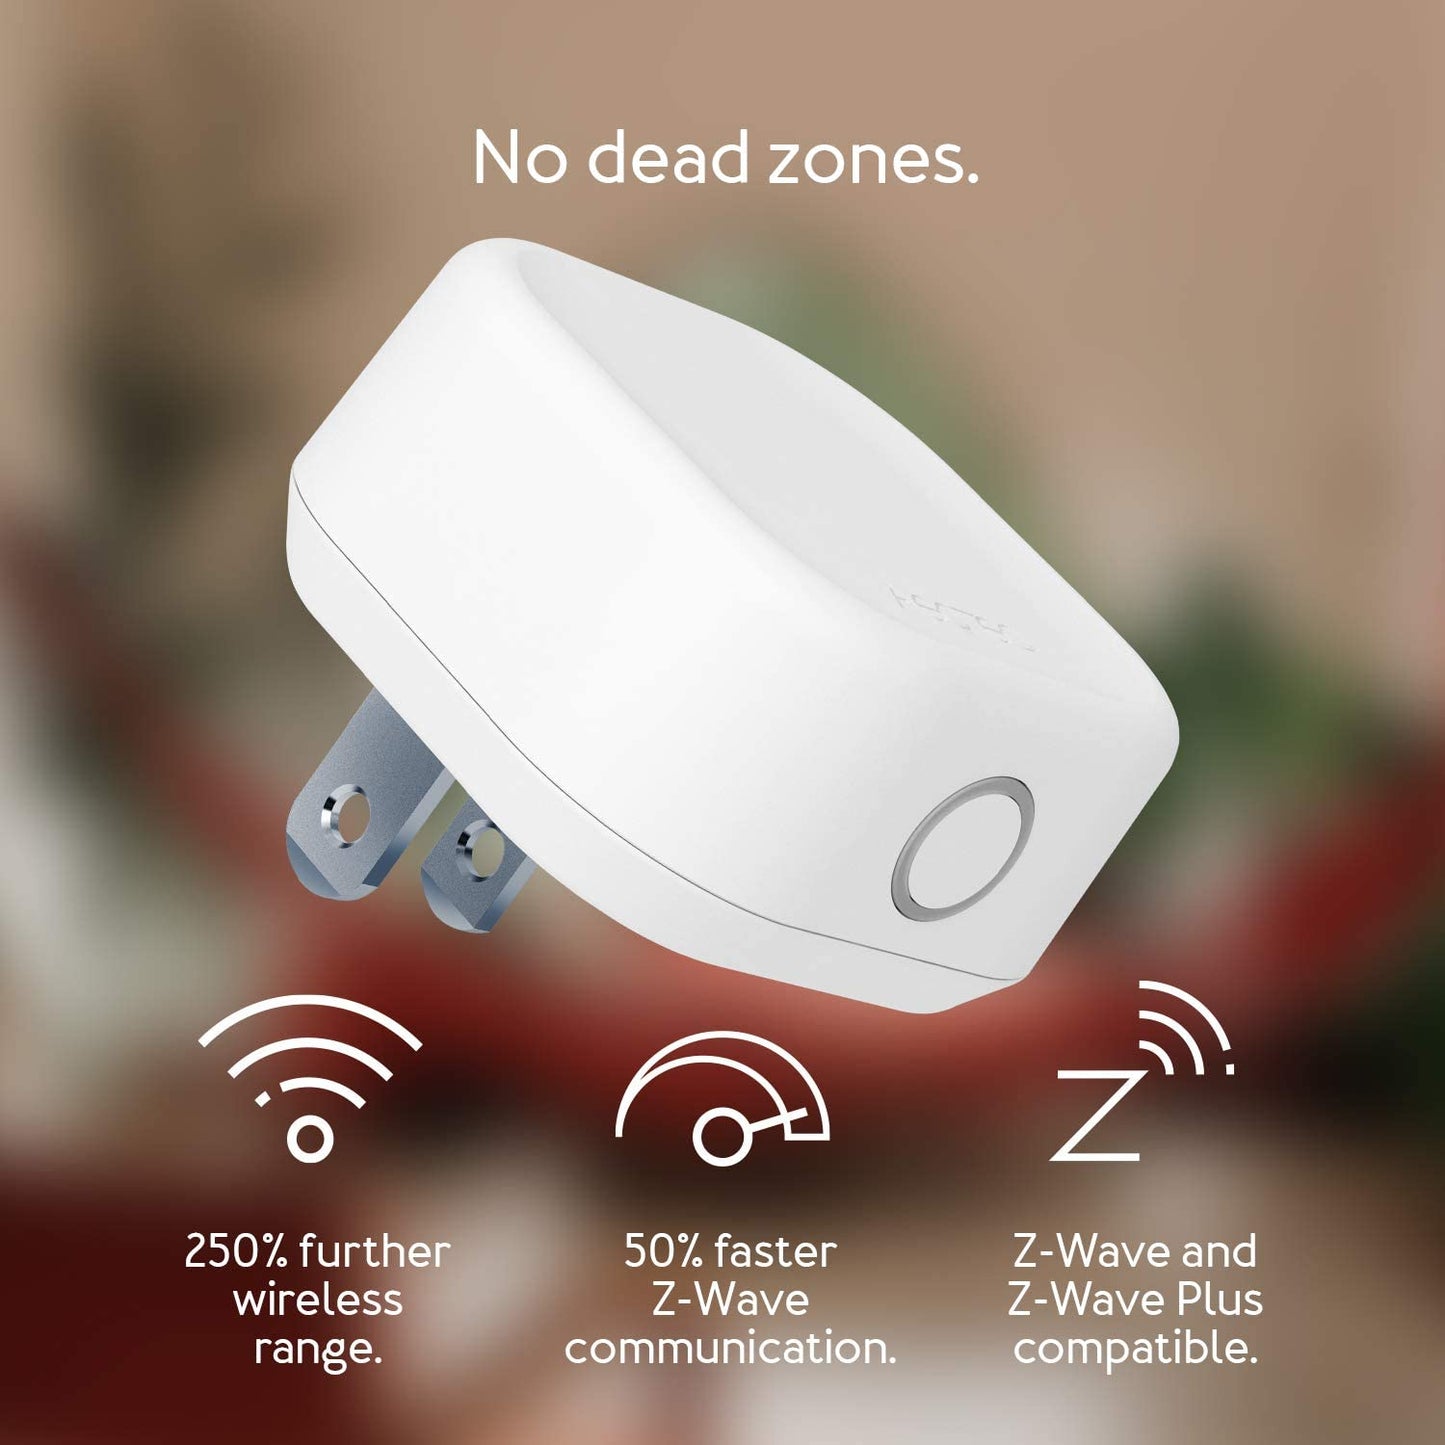 Aeotec Range Extender 7; Zwave Extender and Repeater, Z-Wave Plus 700 series, S2, Smart Start (ZW189)